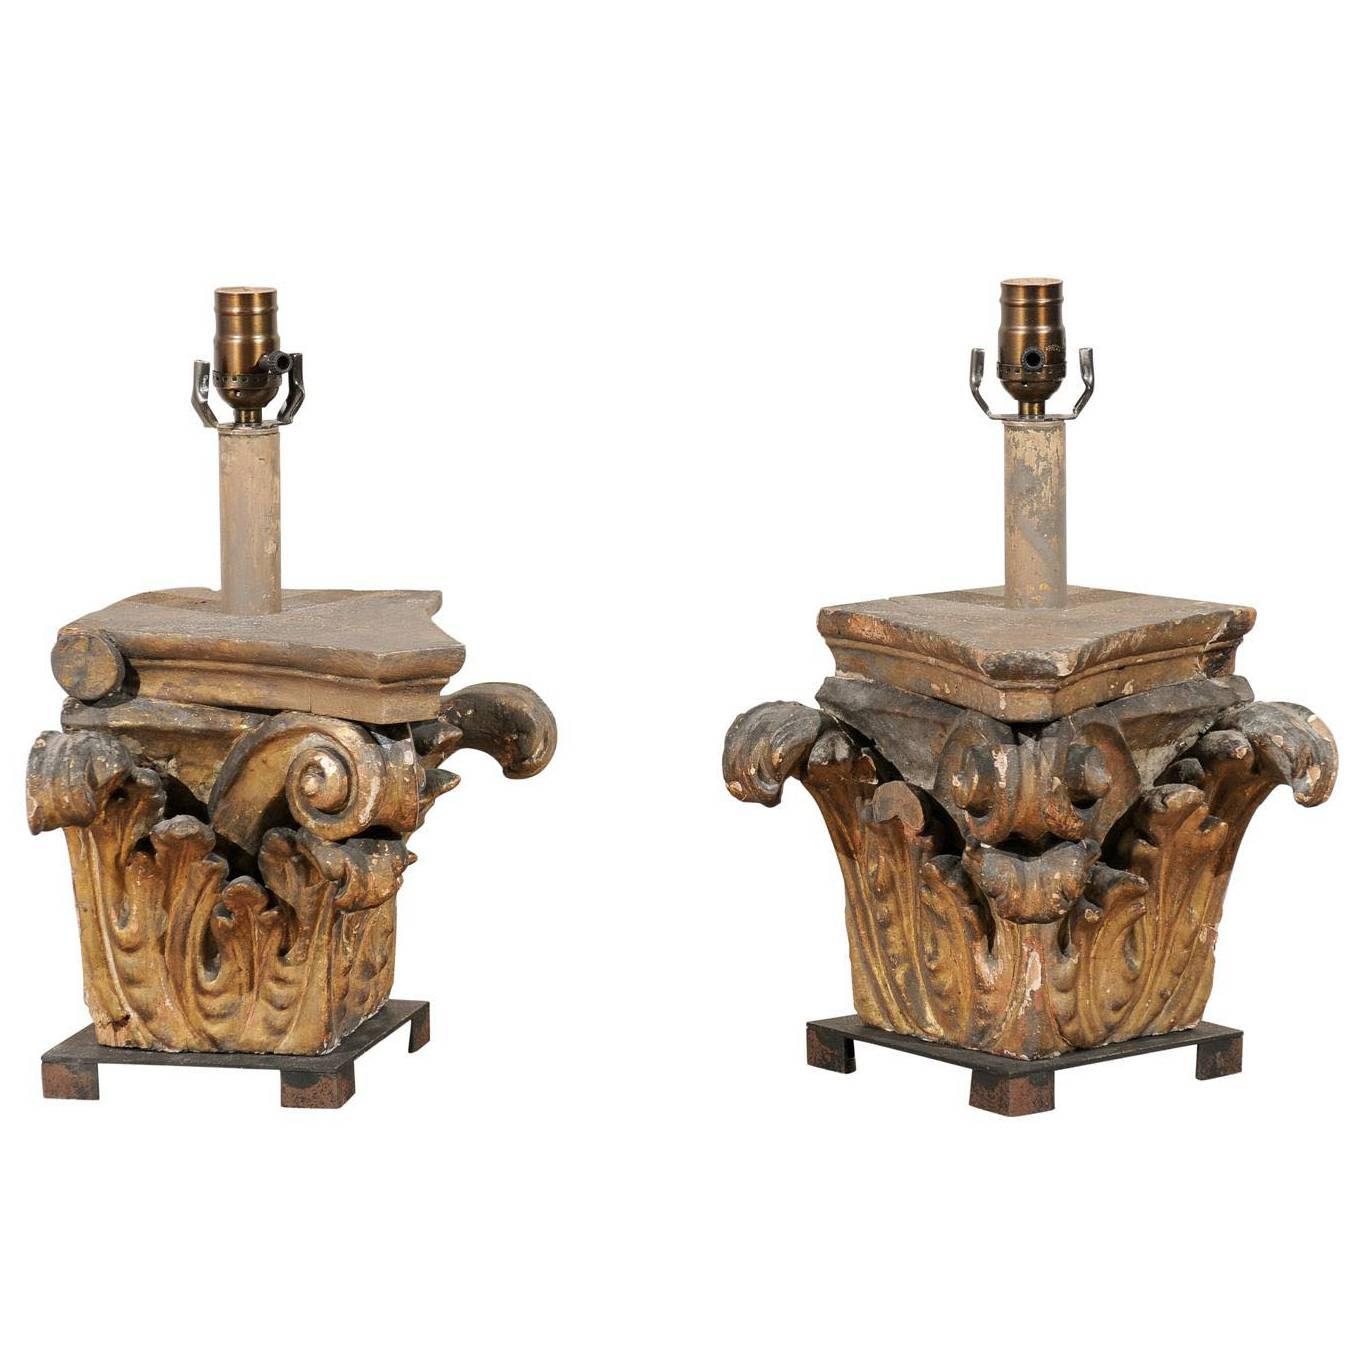 Pair of 19th C Italian Wooden Corinthian Capital Fragments Made into Table Lamps